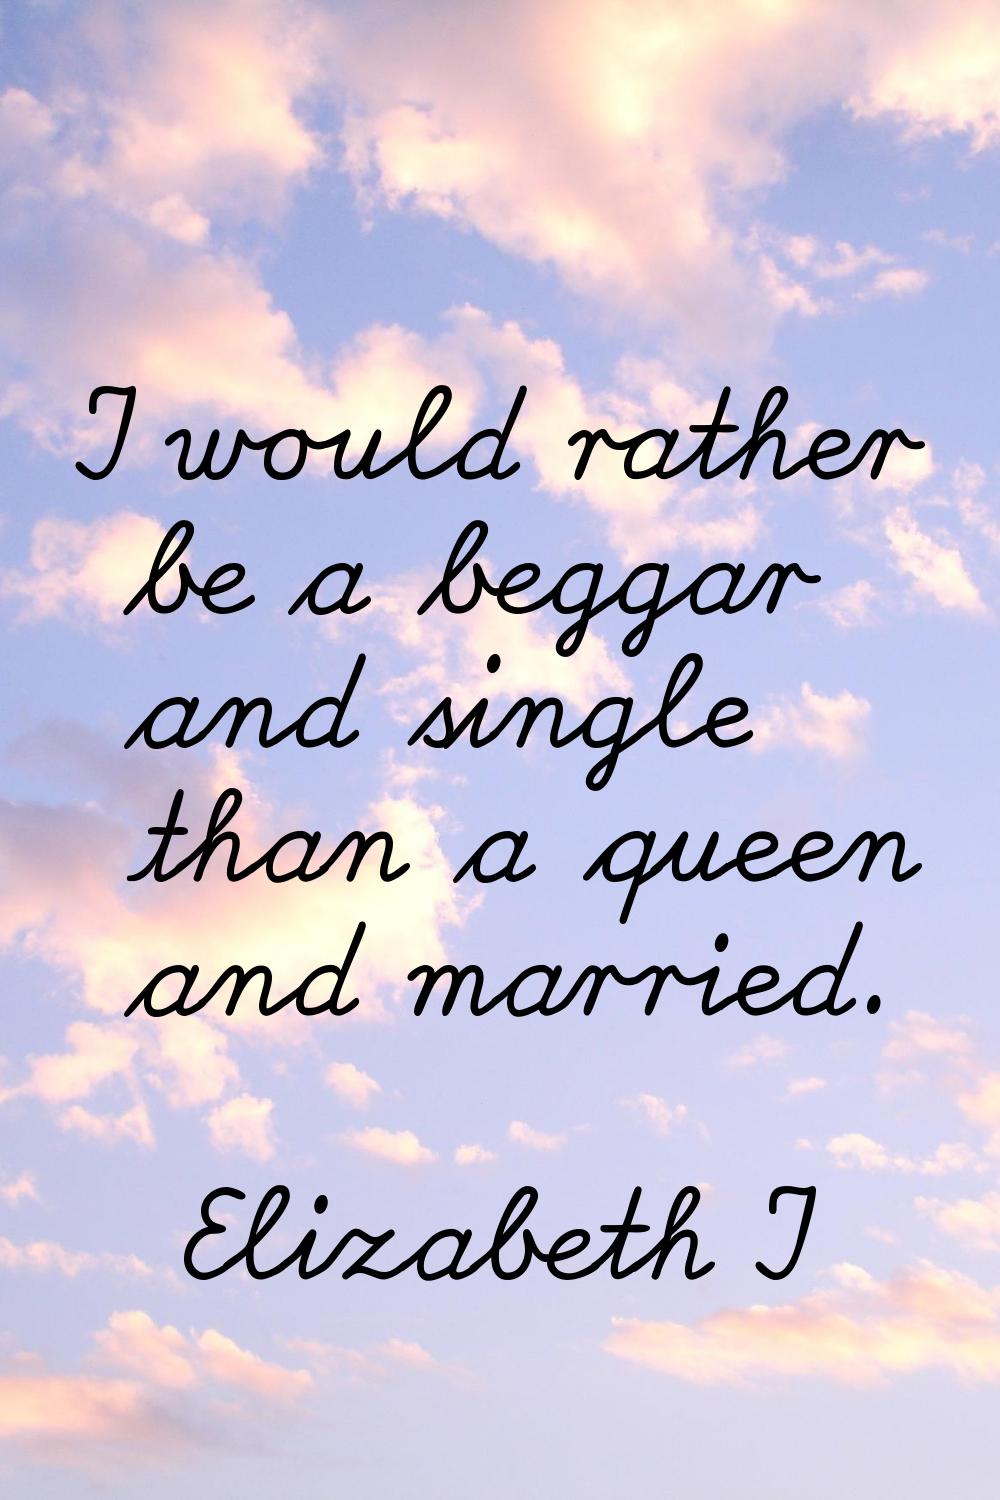 I would rather be a beggar and single than a queen and married.